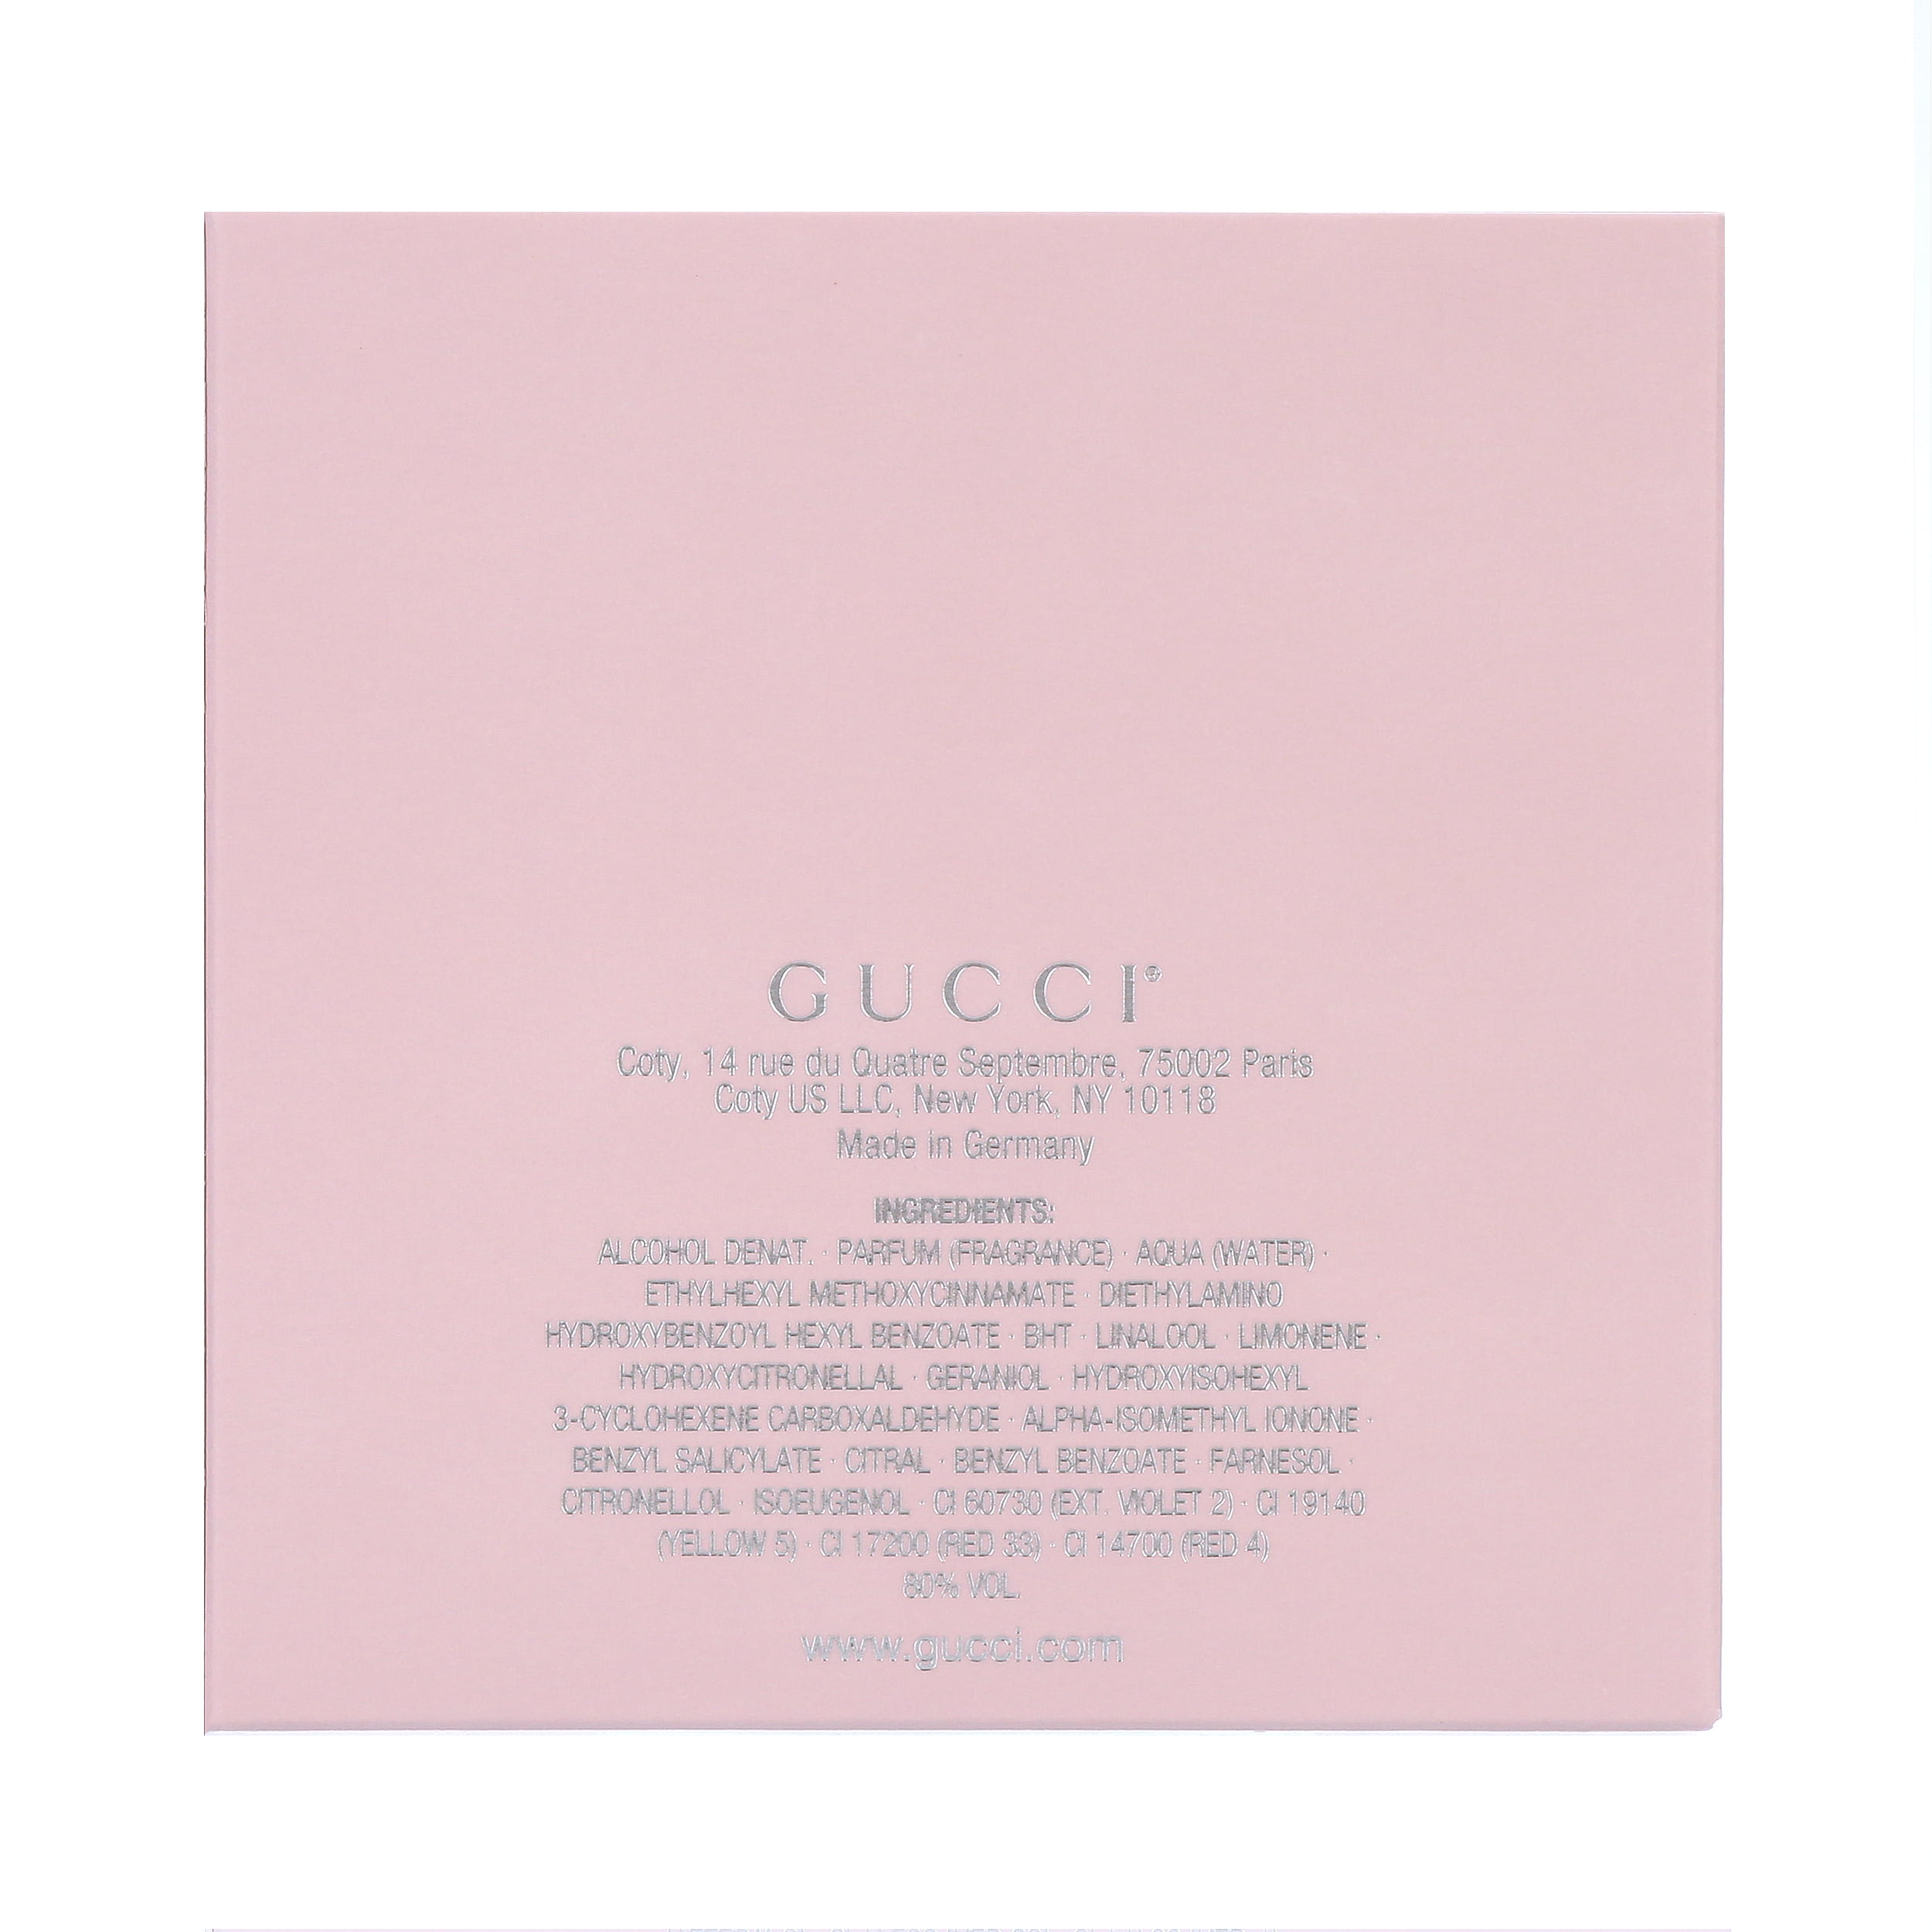 gucci bamboo ingredients